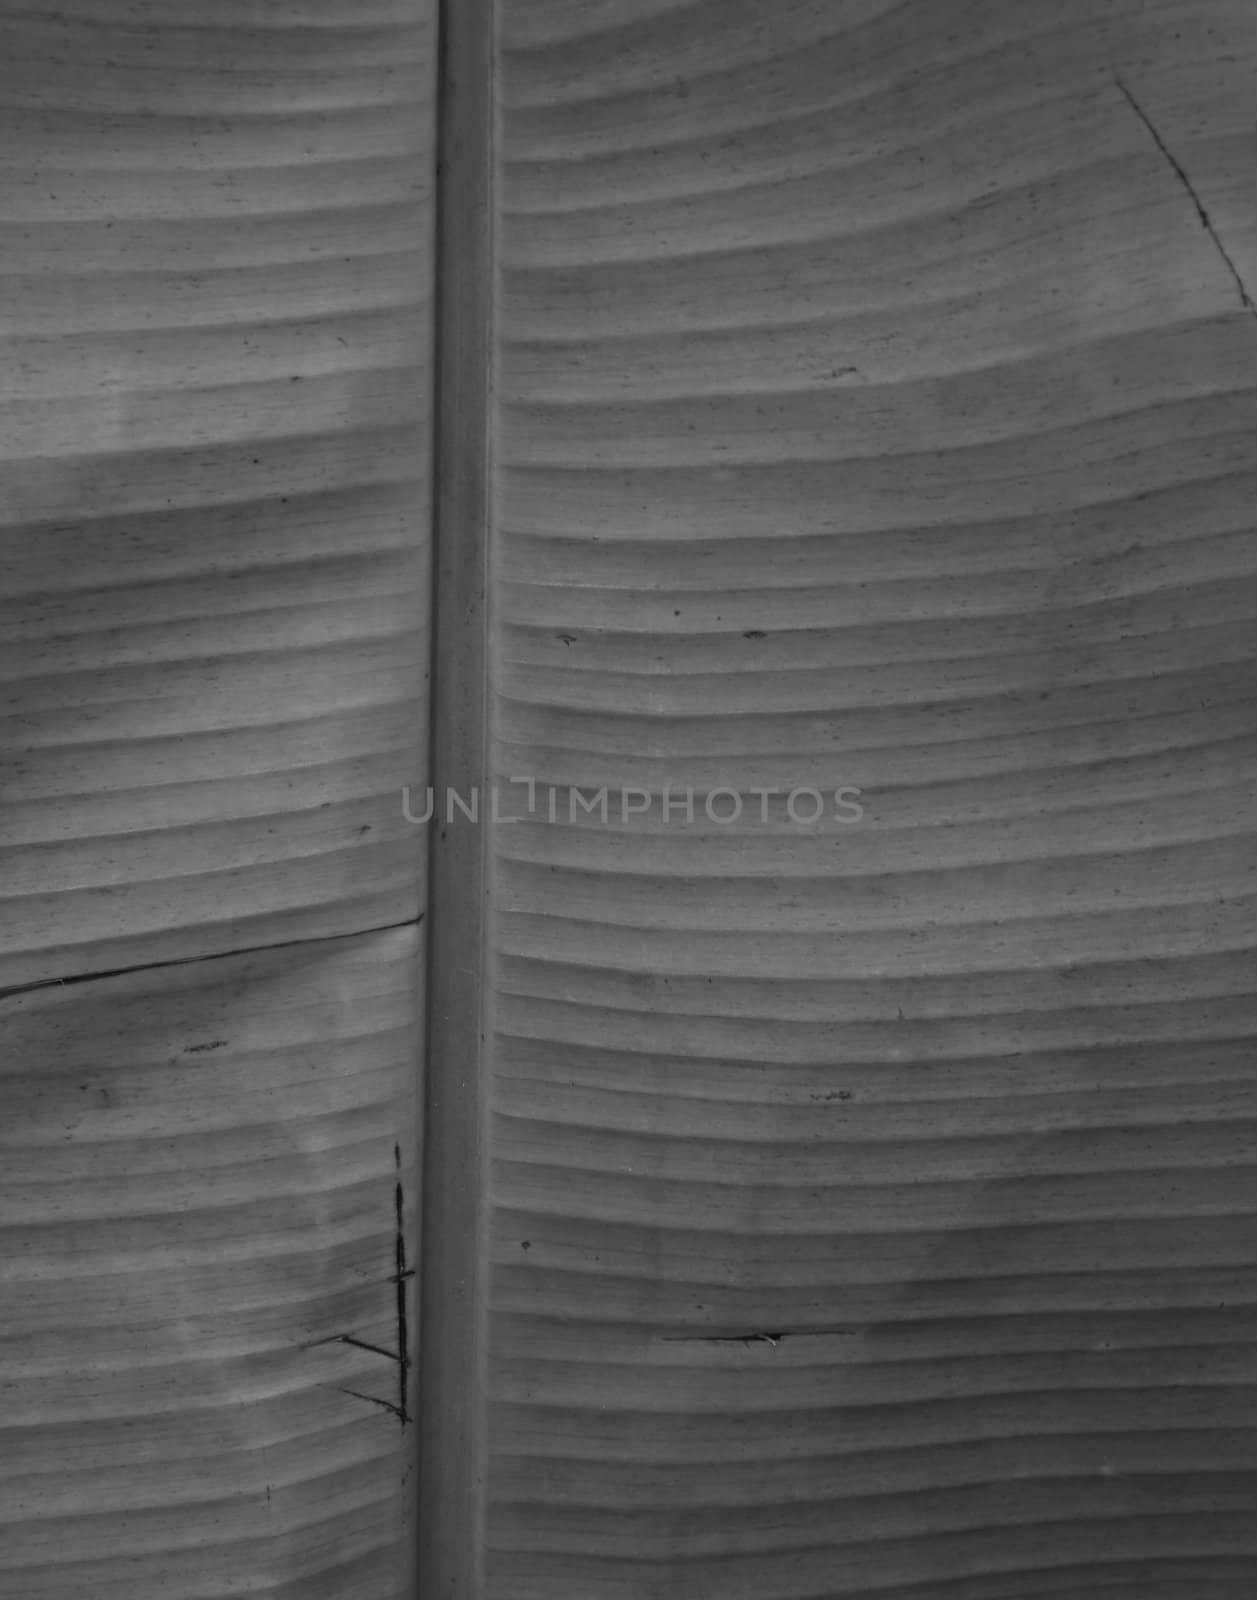 banana leaf background with lines